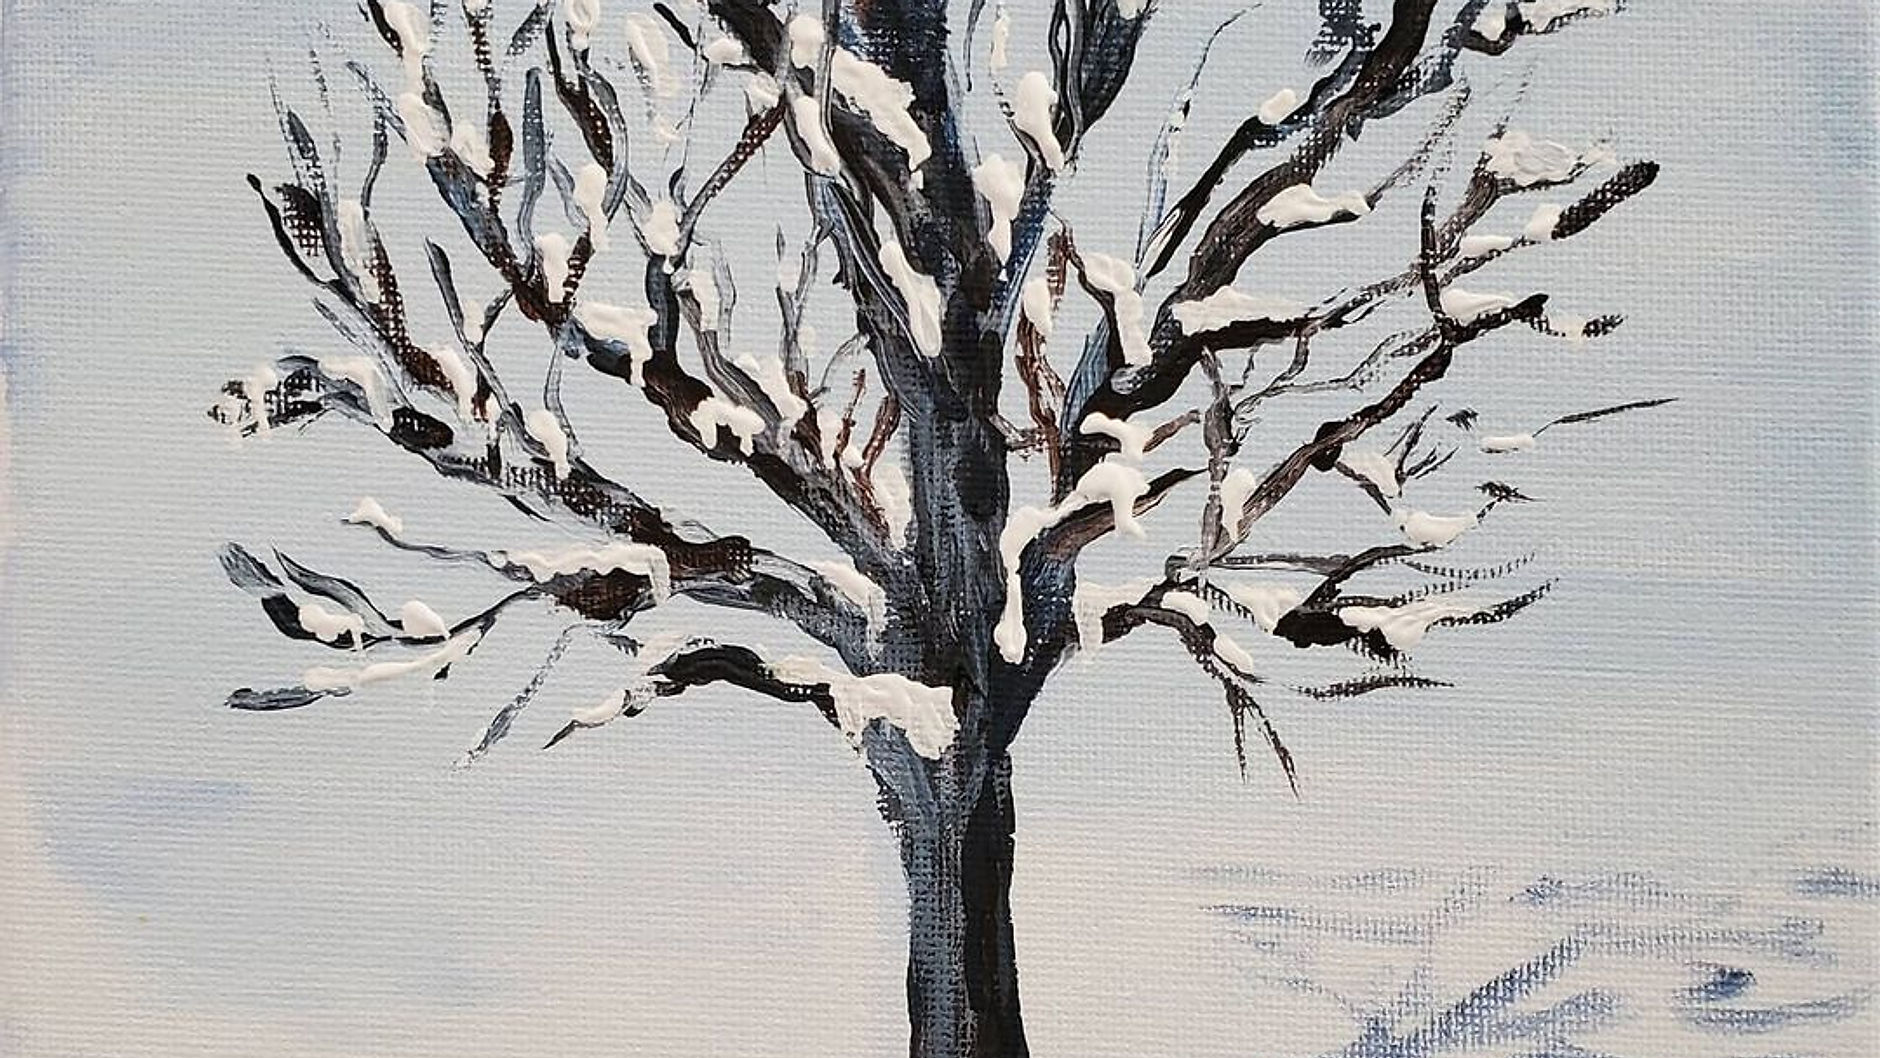 How to Paint a Winter Tree